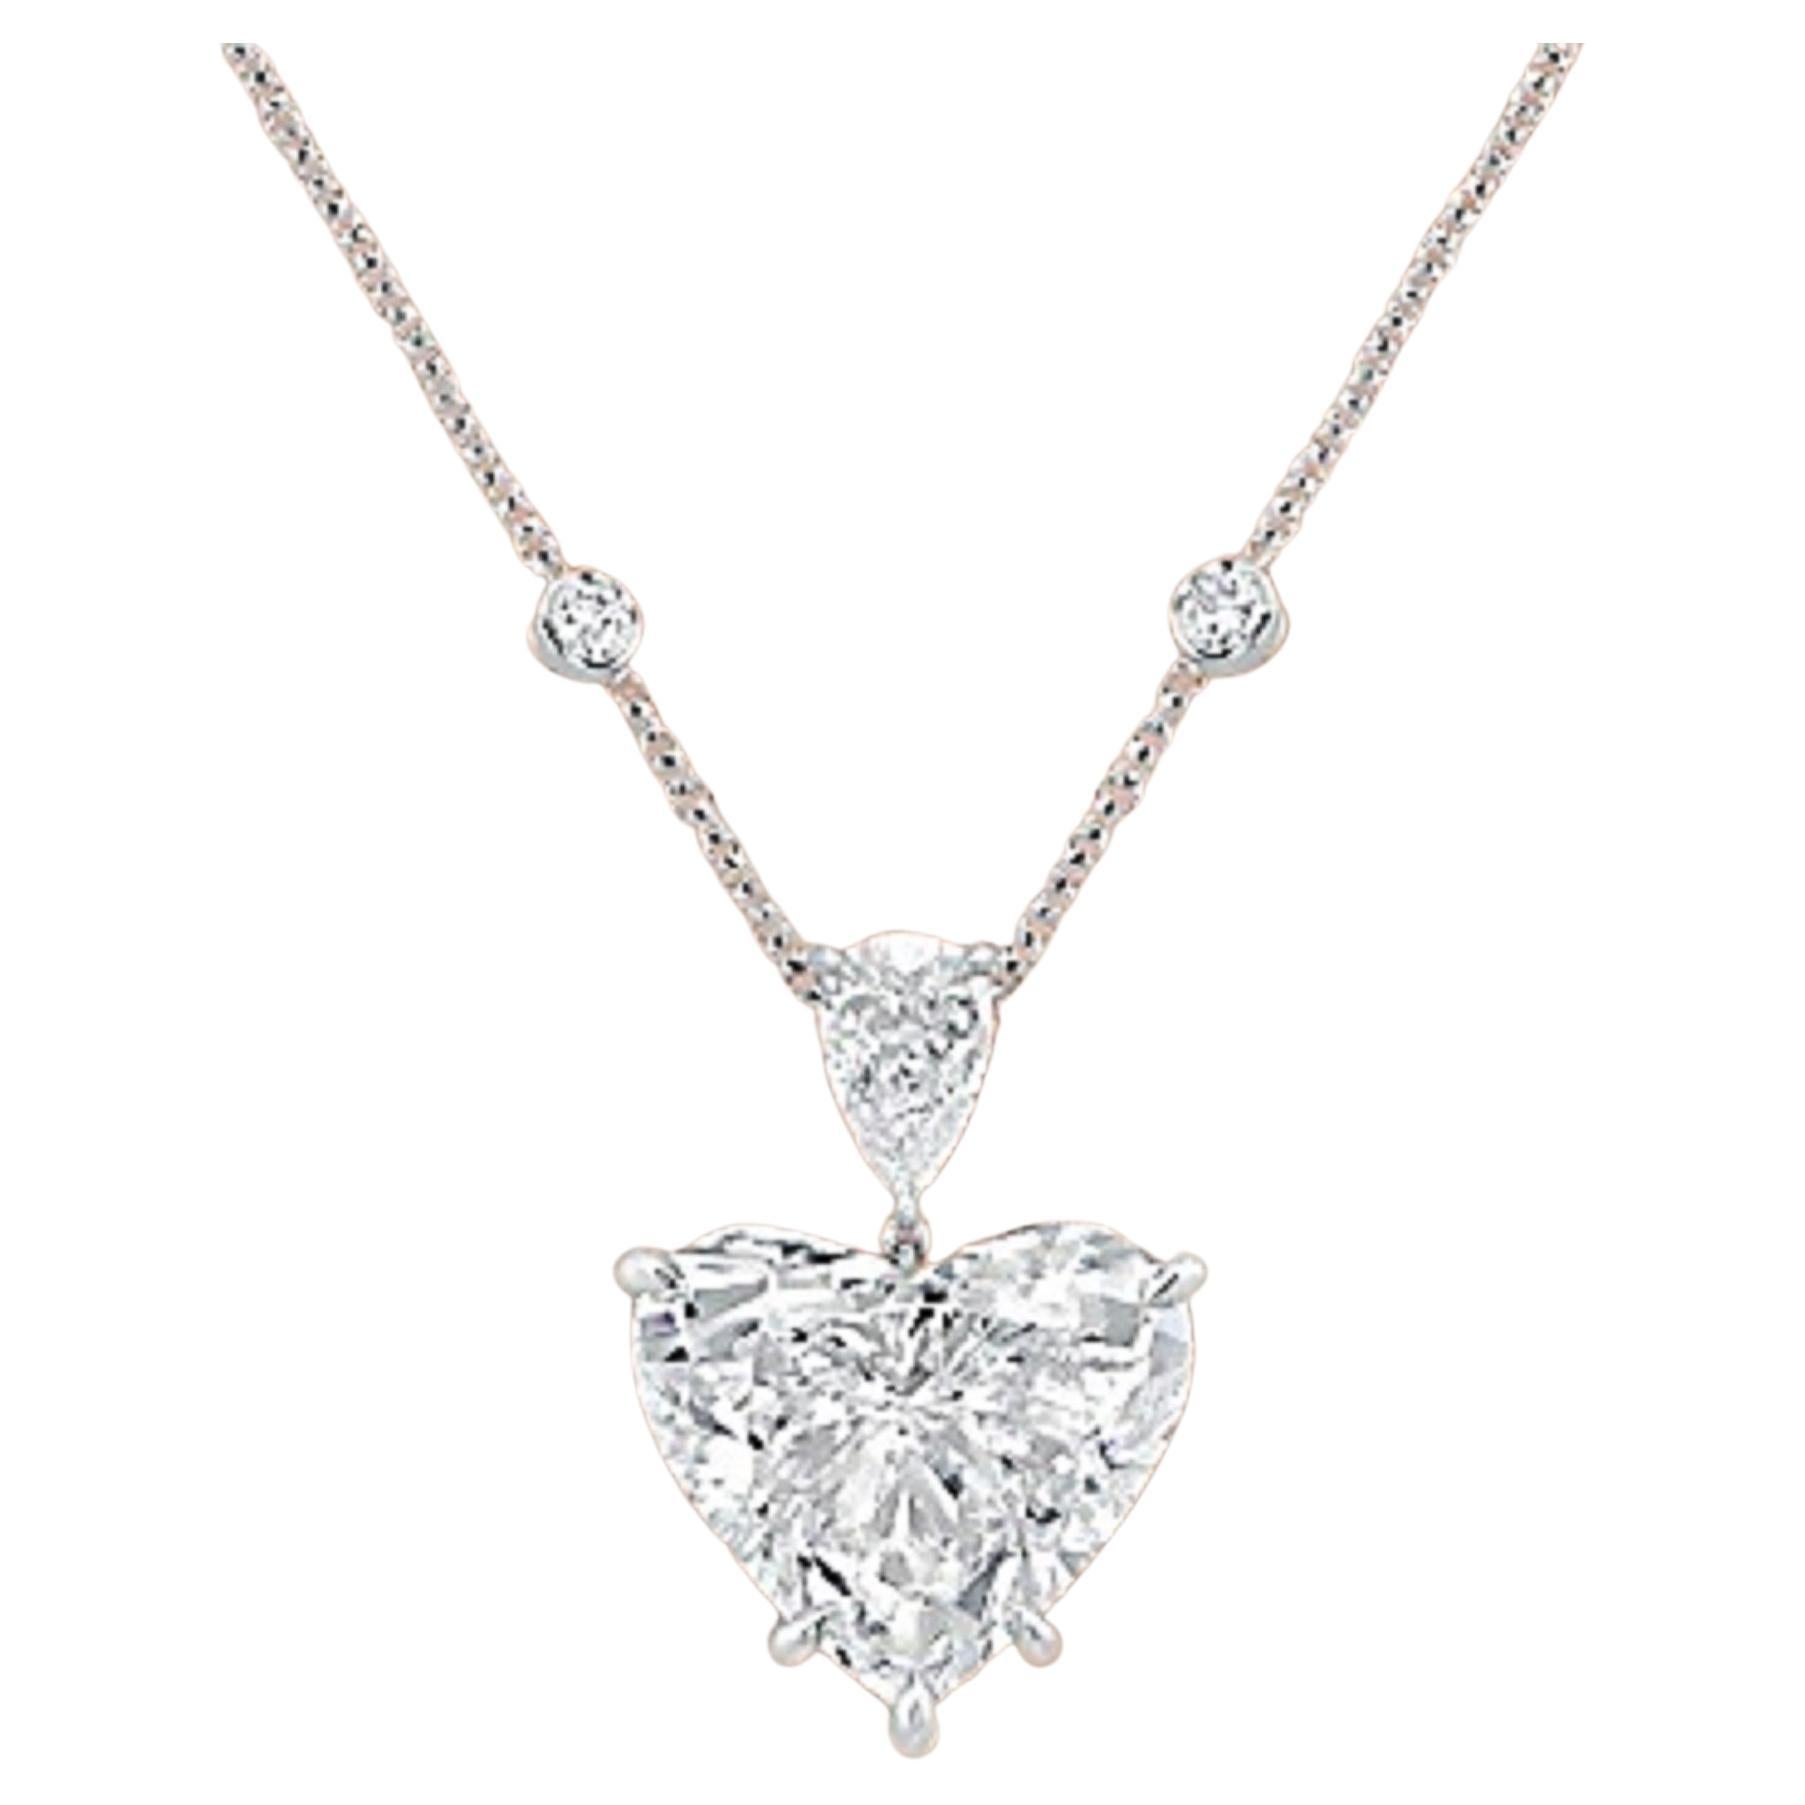 Introducing the Epitome of Elegance: The GIA Certified 10 Carat Heart Shape Diamond Pendant Platinum Necklace! 

Are you ready to dazzle and captivate with unparalleled elegance? Look no further than our exquisite masterpiece – the ultimate symbol